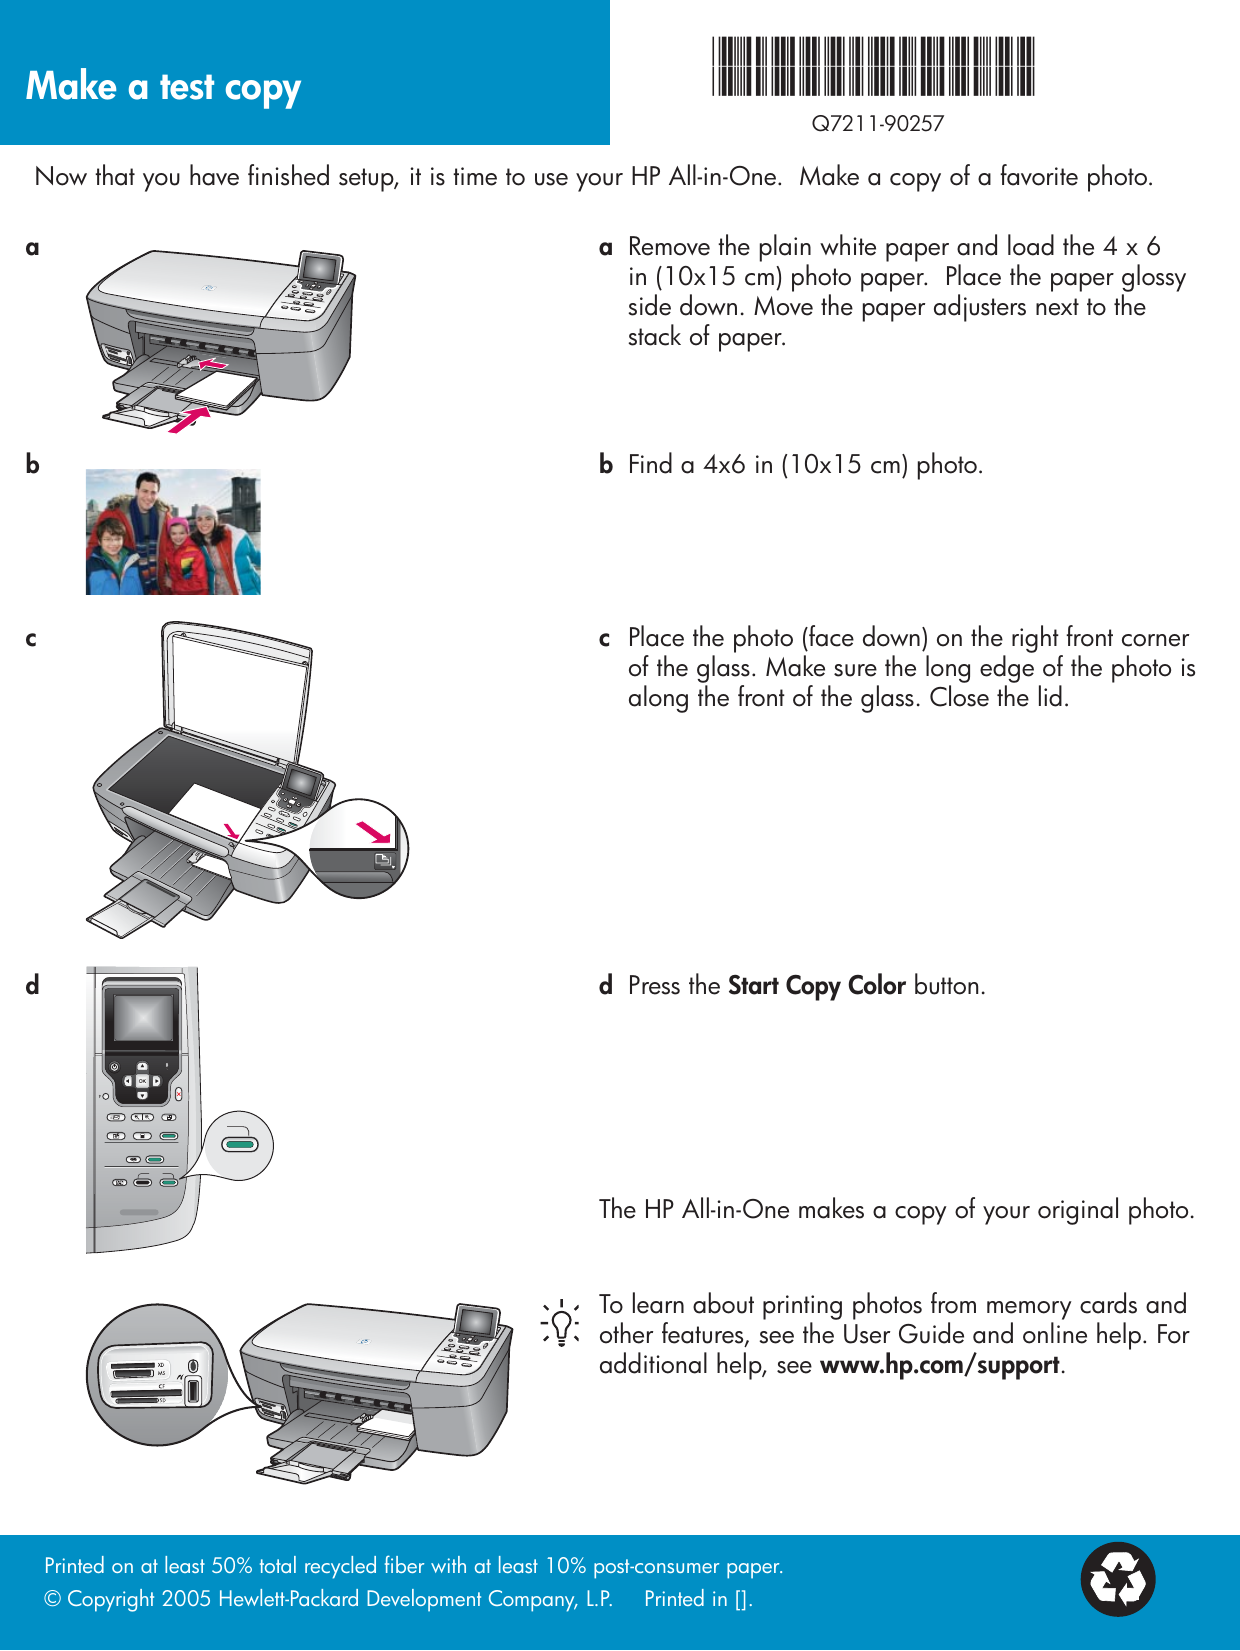 Page 12 of 12 - Hp Hp-Photosmart-2575-All-In-One-Printer-Setup-Guide- USSherpaHi  Hp-photosmart-2575-all-in-one-printer-setup-guide